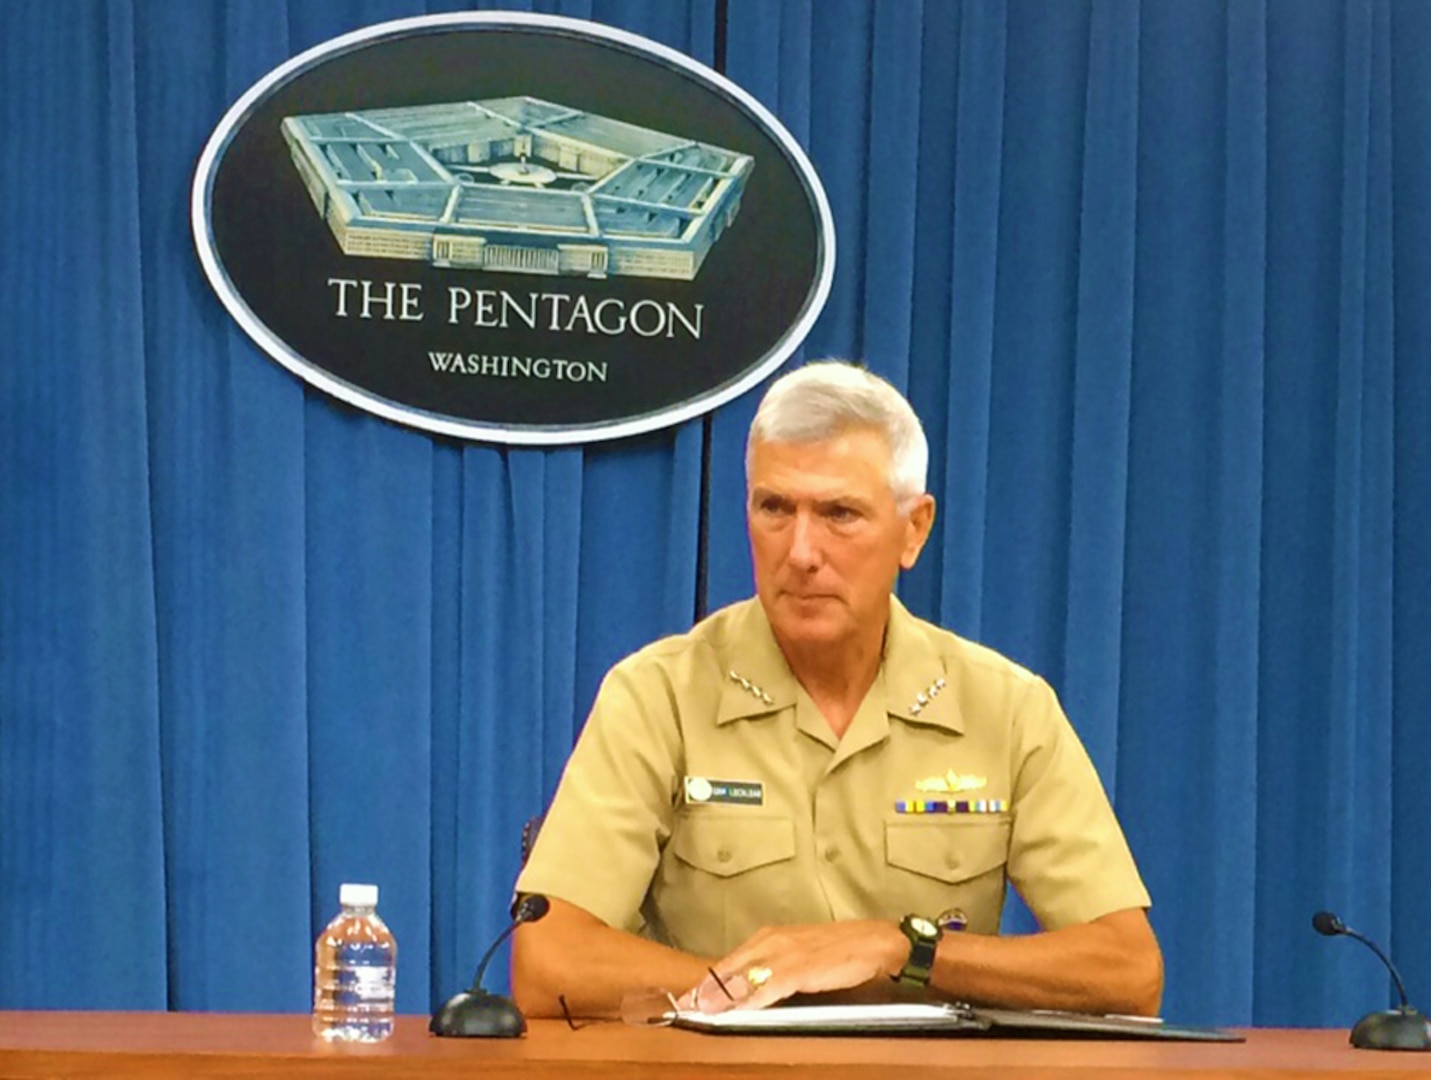 WASHINGTON (July 29, 2014) - Navy Adm. Samuel J. Locklear III, commander of U.S. Pacific Command, listens to a reporter’s question during a news conference at the Pentagon.     